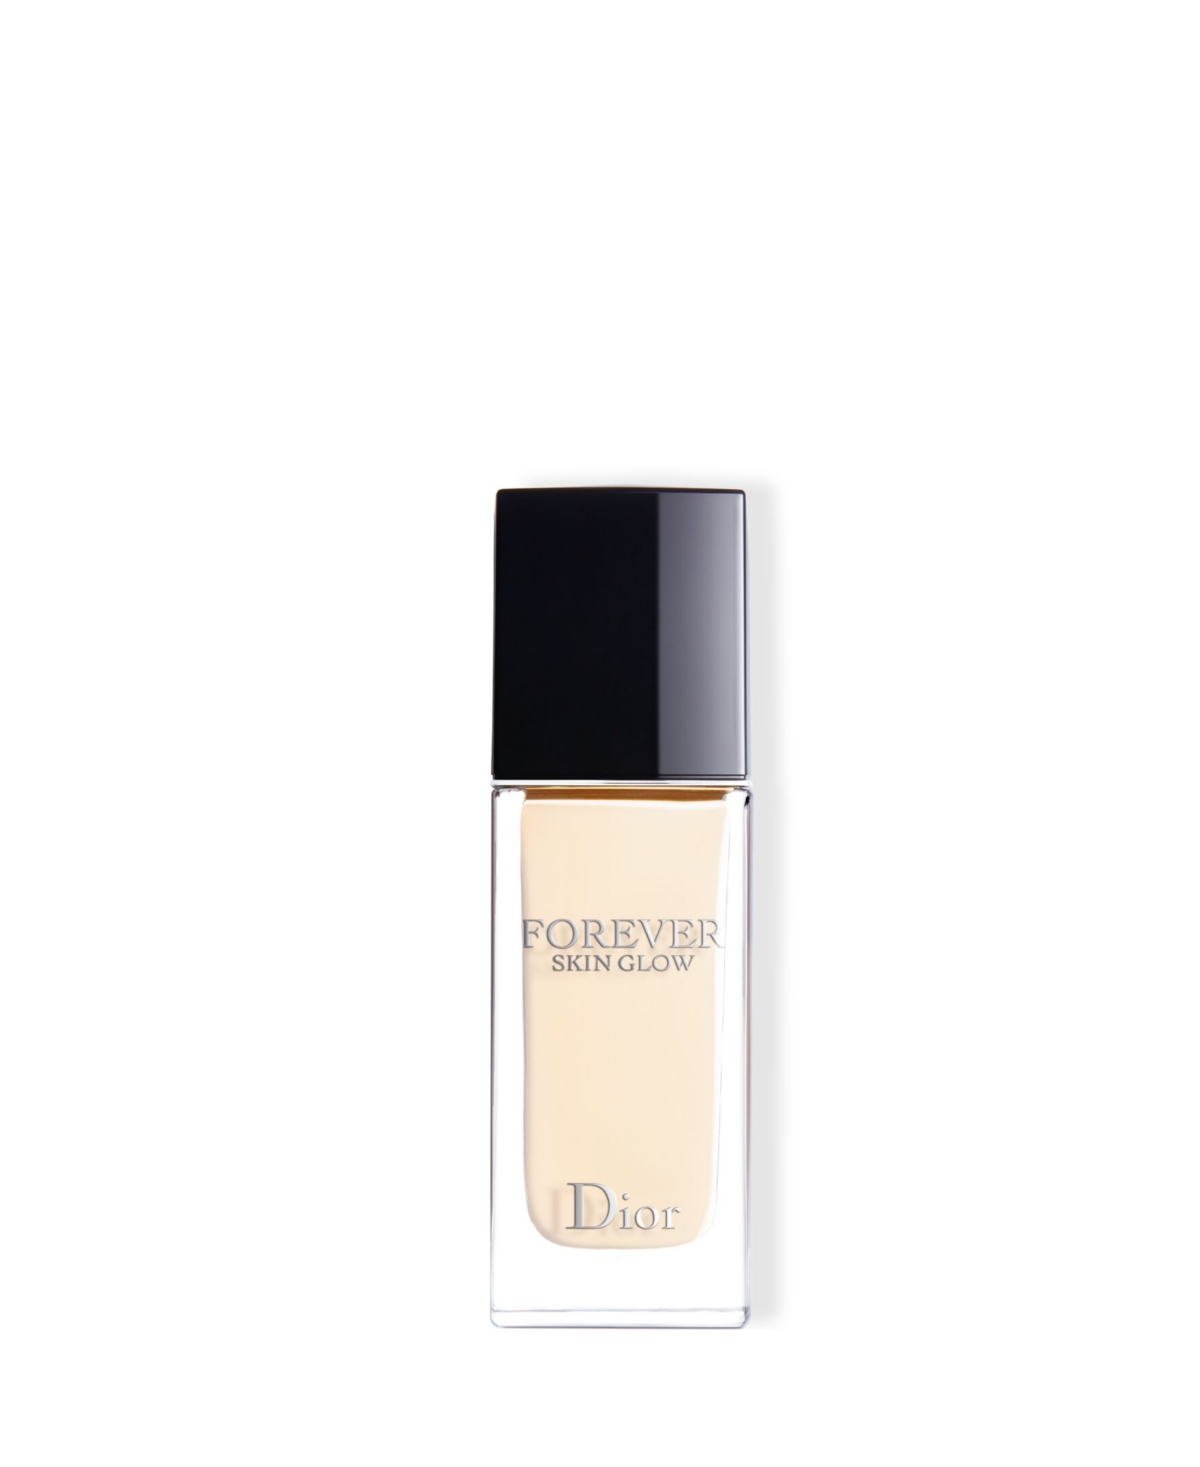 Dior Forever Skin Glow Hydrating Foundation Spf 15 In Neutral (fair Skin With Neutral Tones)